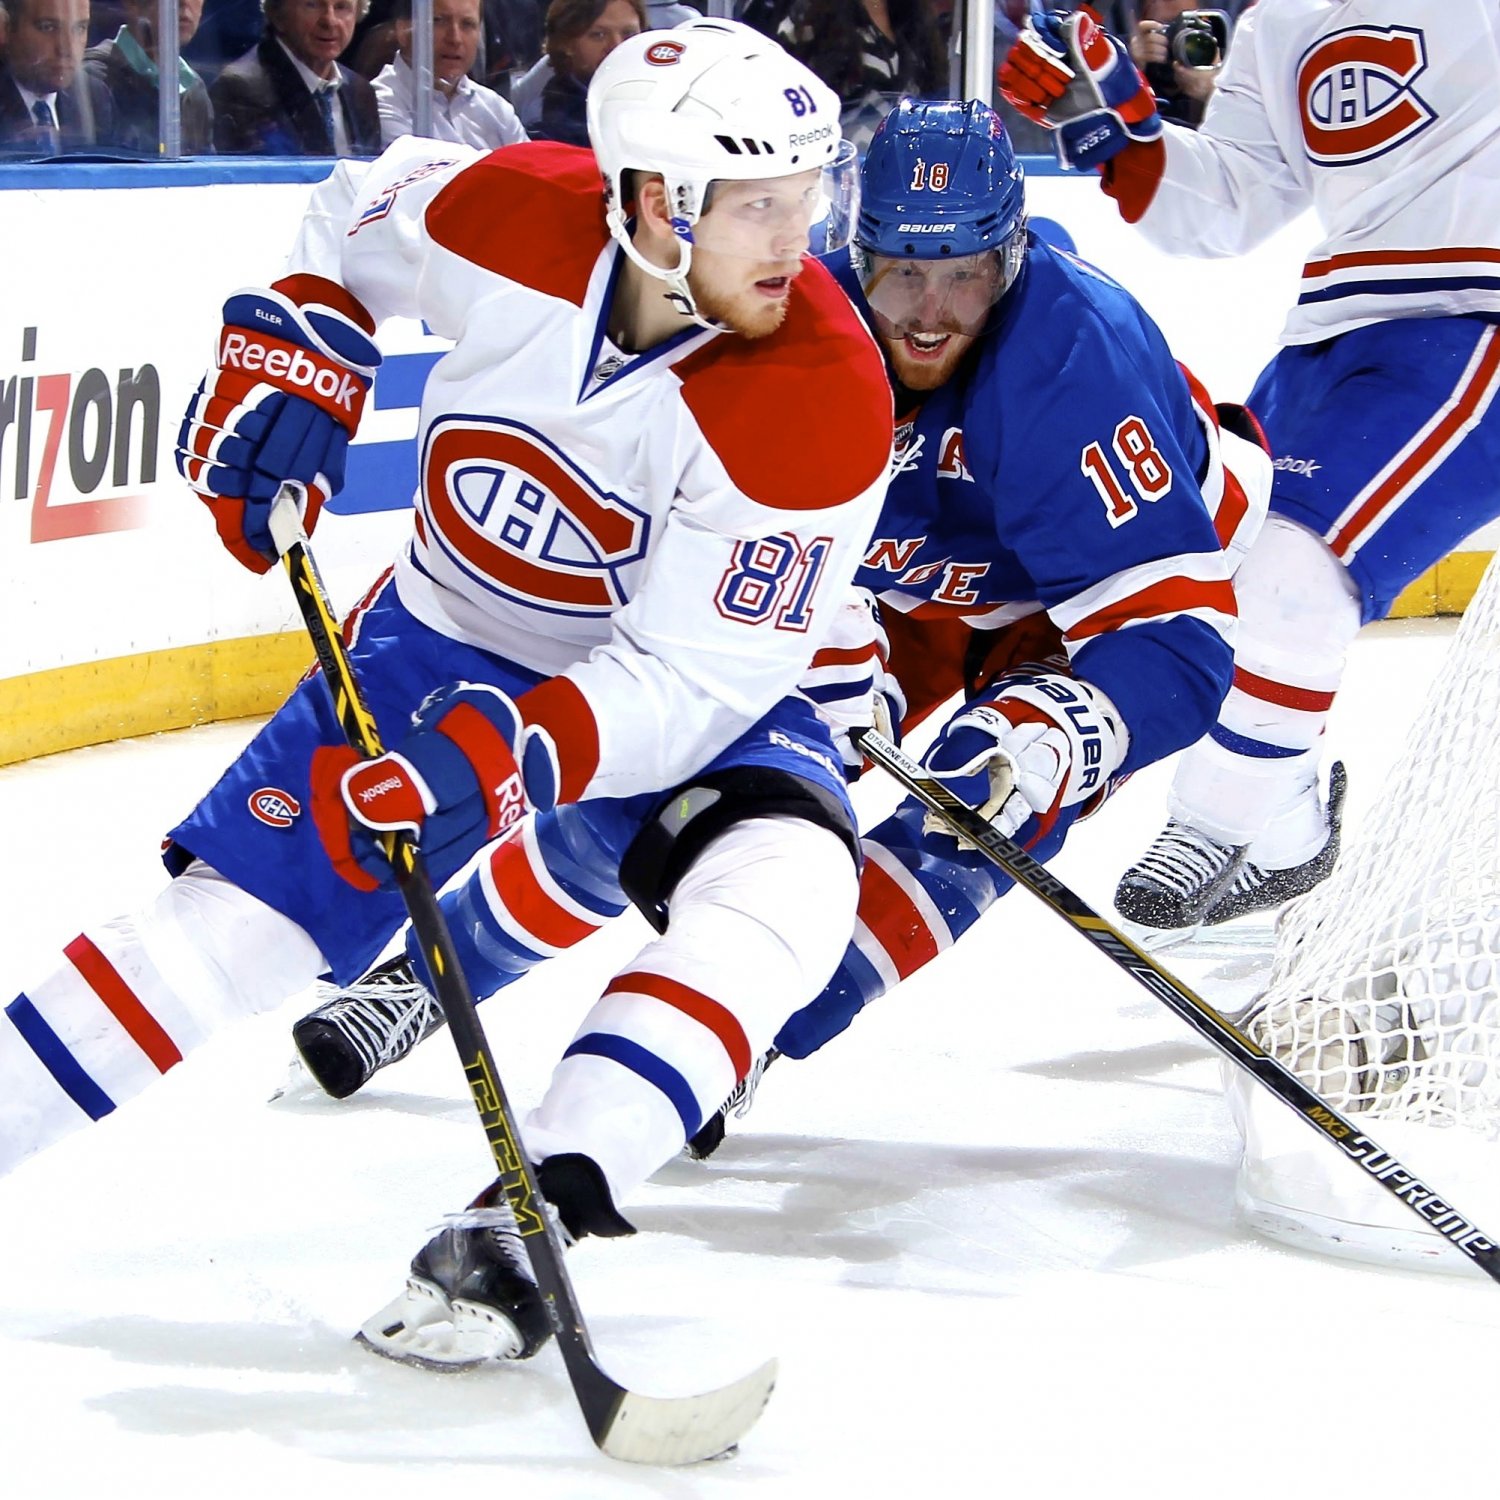 Montreal Canadiens vs. New York Rangers Game 3 Live Score and